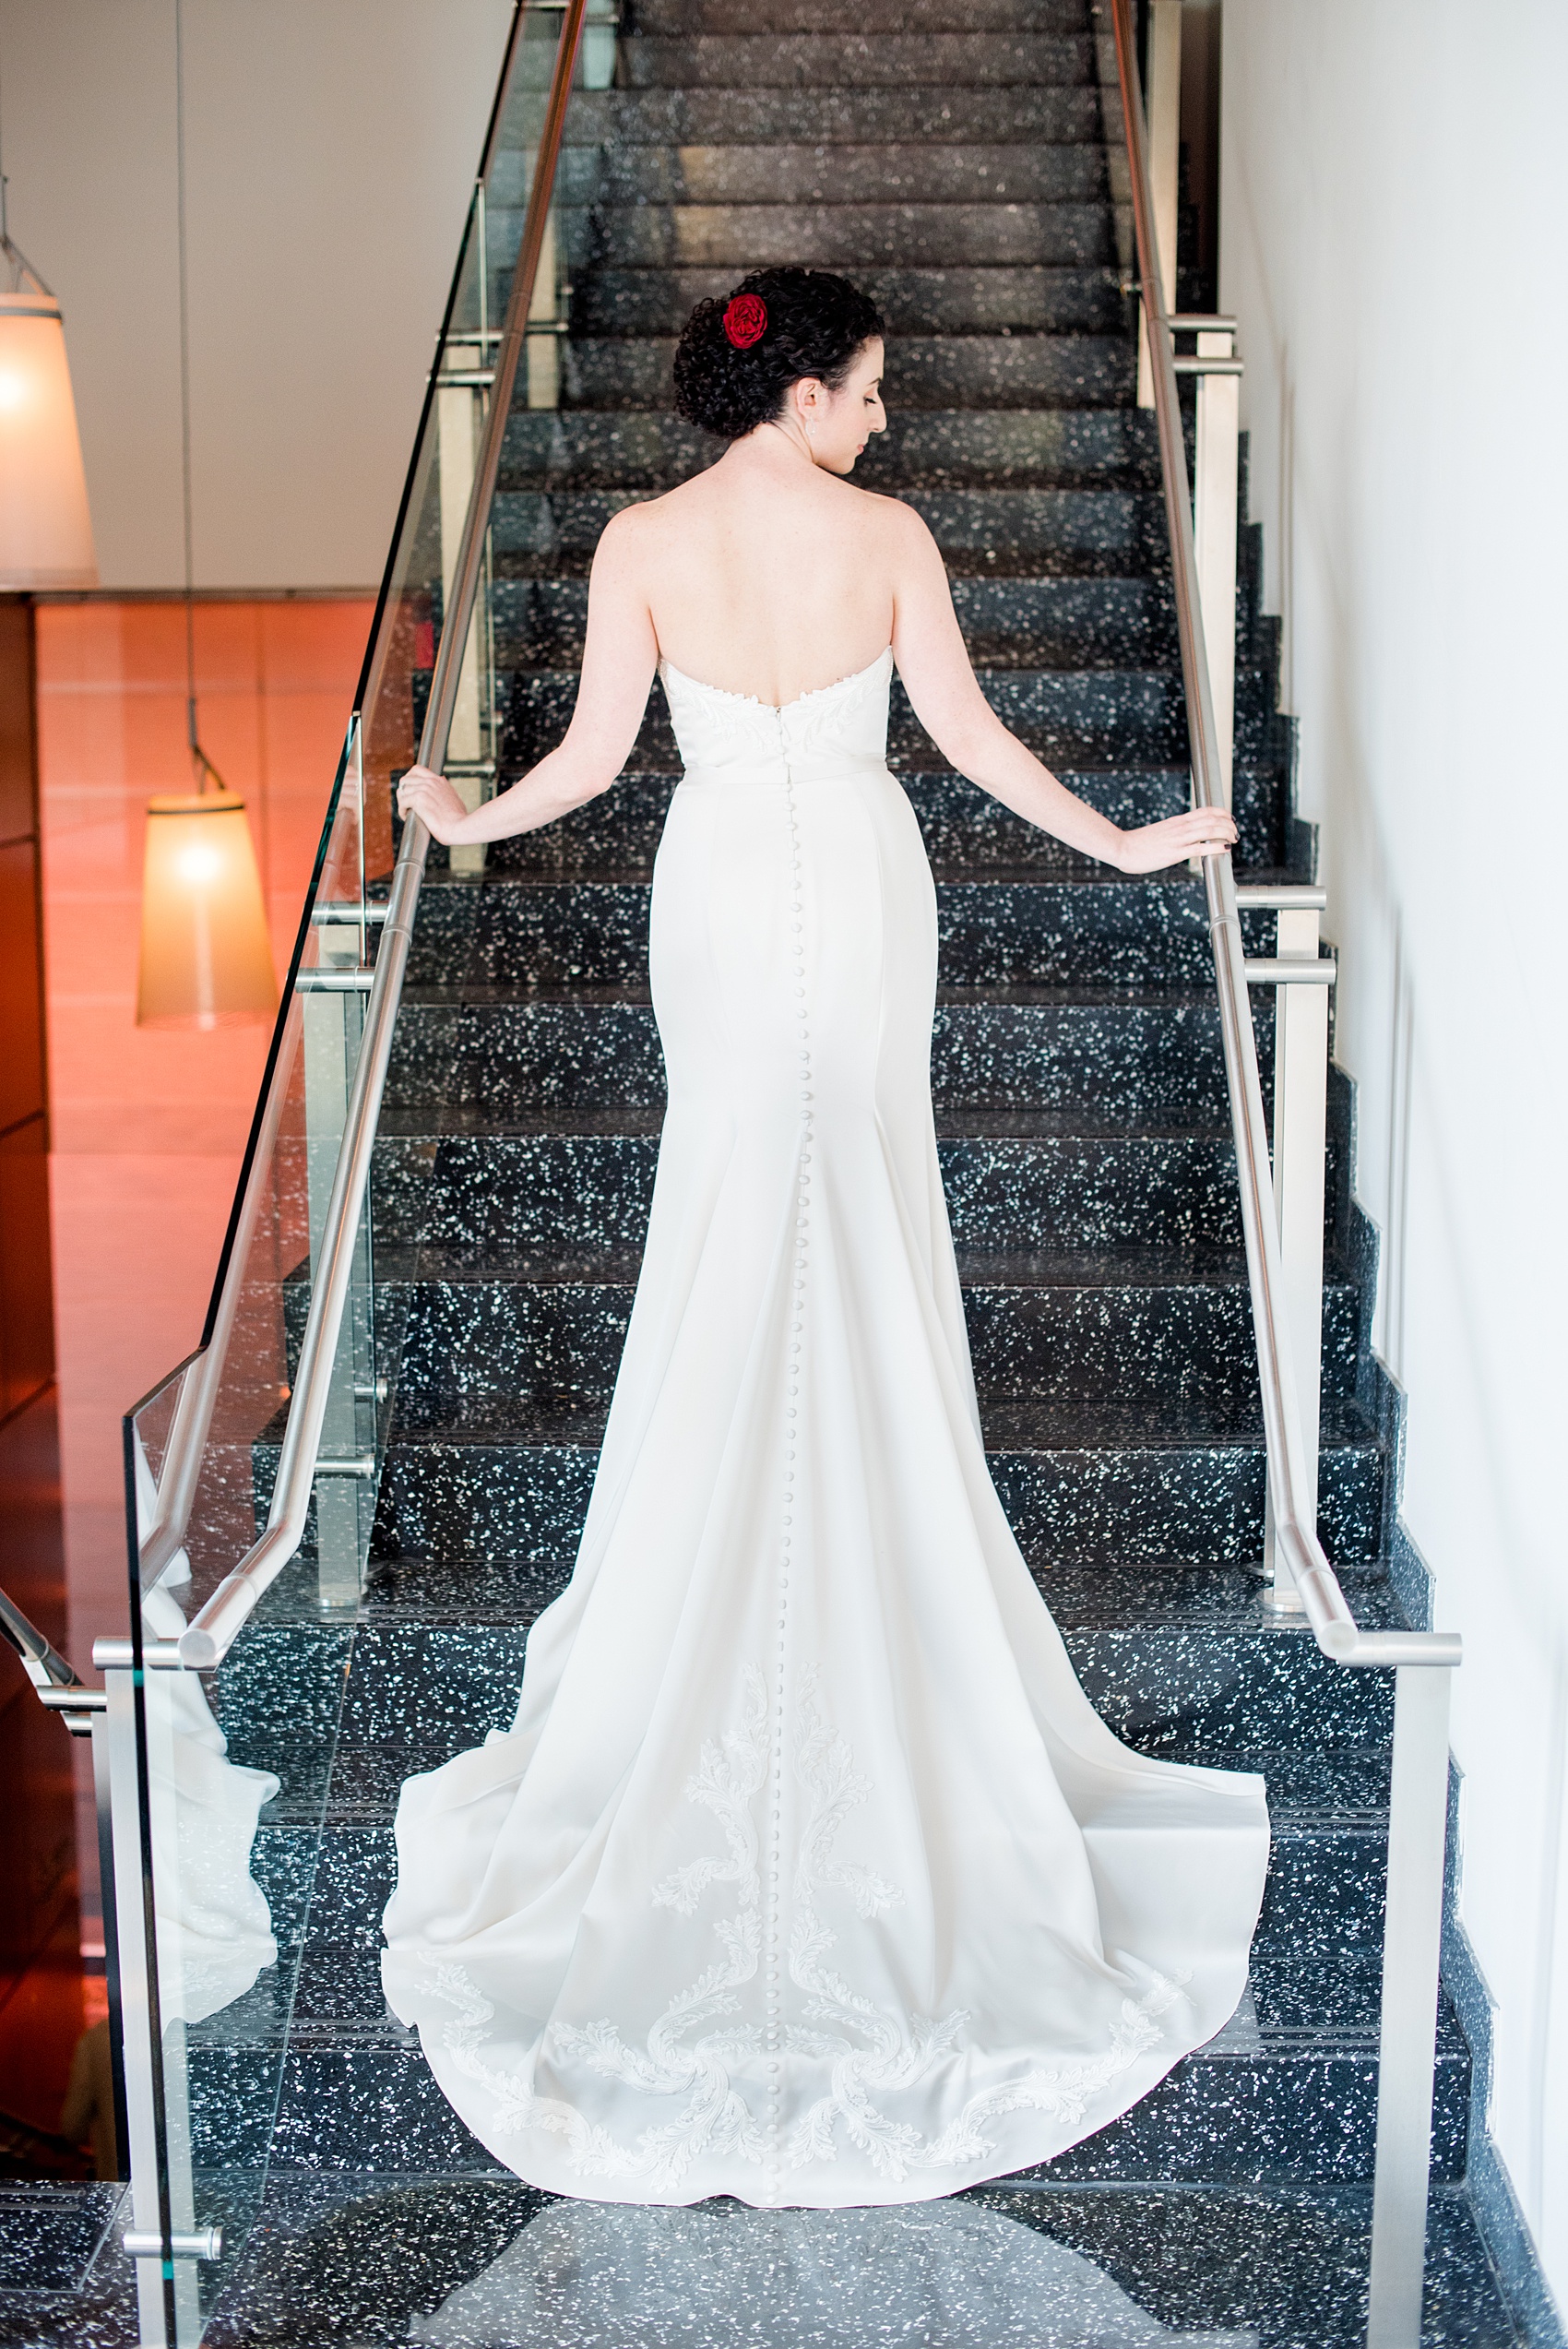 W Hoboken wedding photos by Mikkel Paige Photography. Picture of the bride in her Paloma Blanca strapless sweetheart neckline, beaded gown, with her train cascading down the stairs of the venue. #mikkelpaige #HobokenWedding #NewJerseyPhotographer #NewYorkCityPhotographer #NYCweddingphotographer #brideandgroomphotos #redpeonies #romanticwedding #springwedding #CityWedding